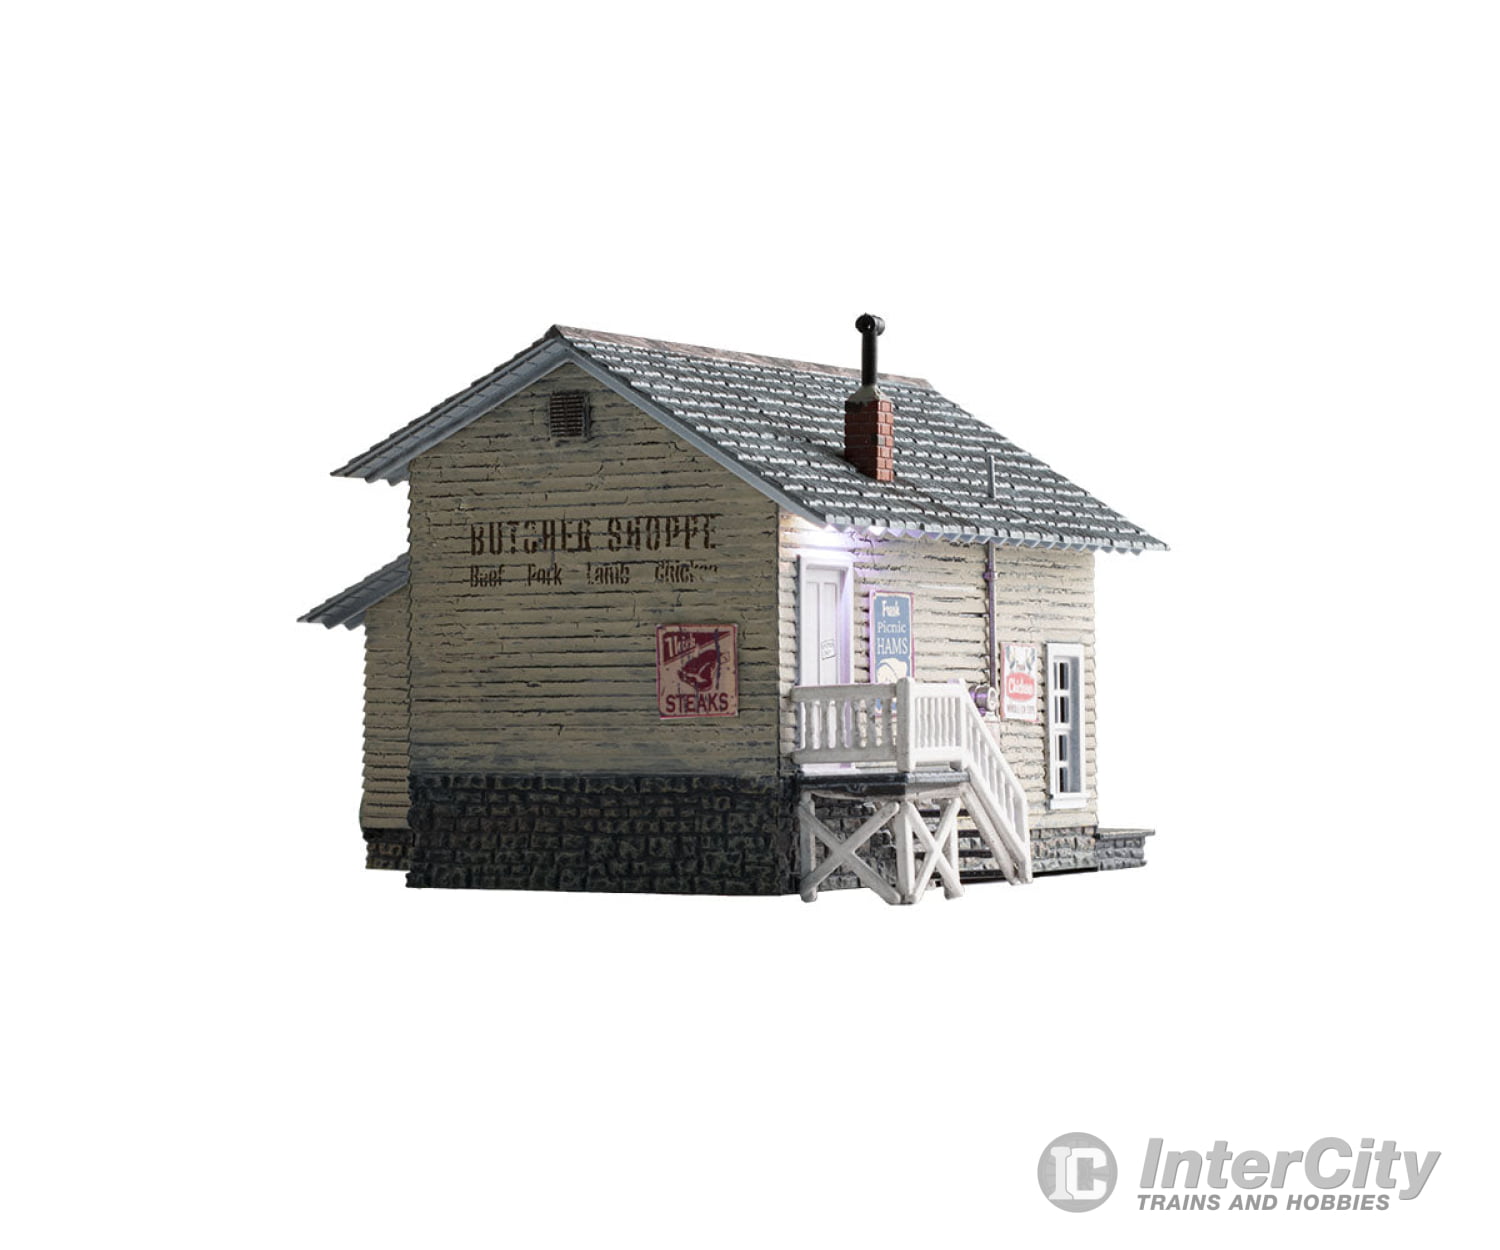 Woodland Scenics 5068 Carver’s Butcher Shoppe Ho Scale Structures